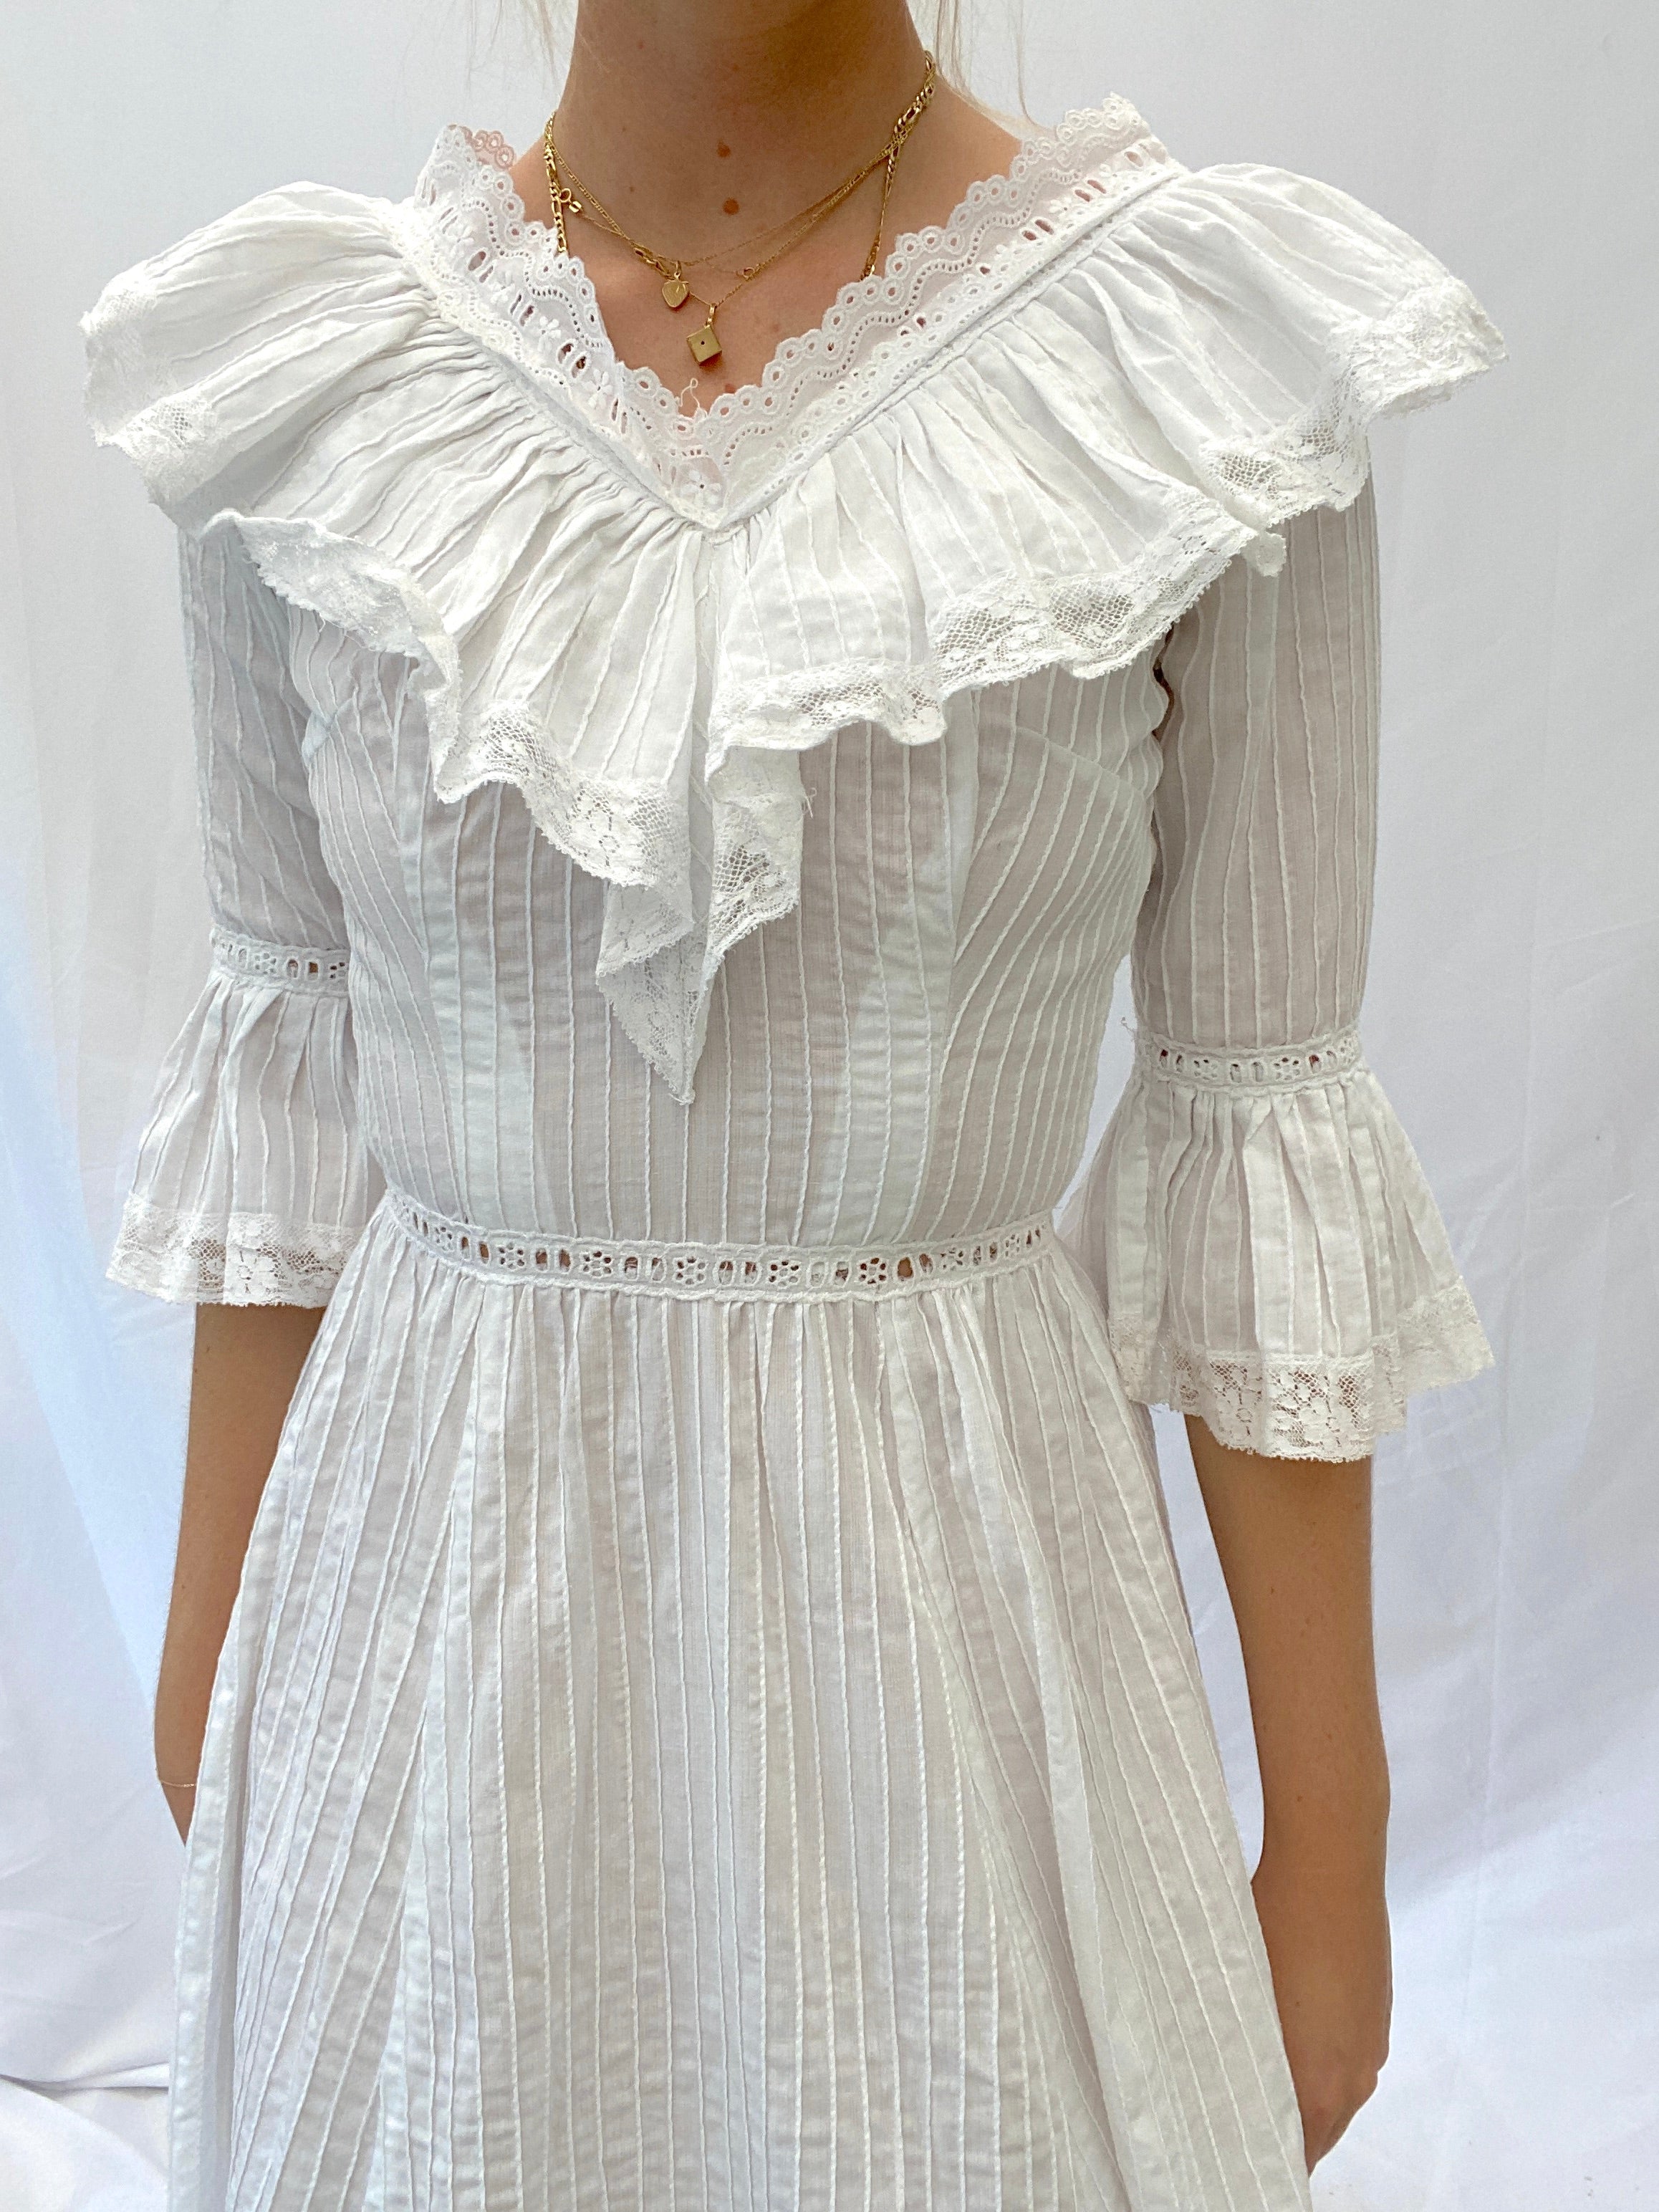 1970's White Cotton Mexican Wedding Dress with Large Ruffle